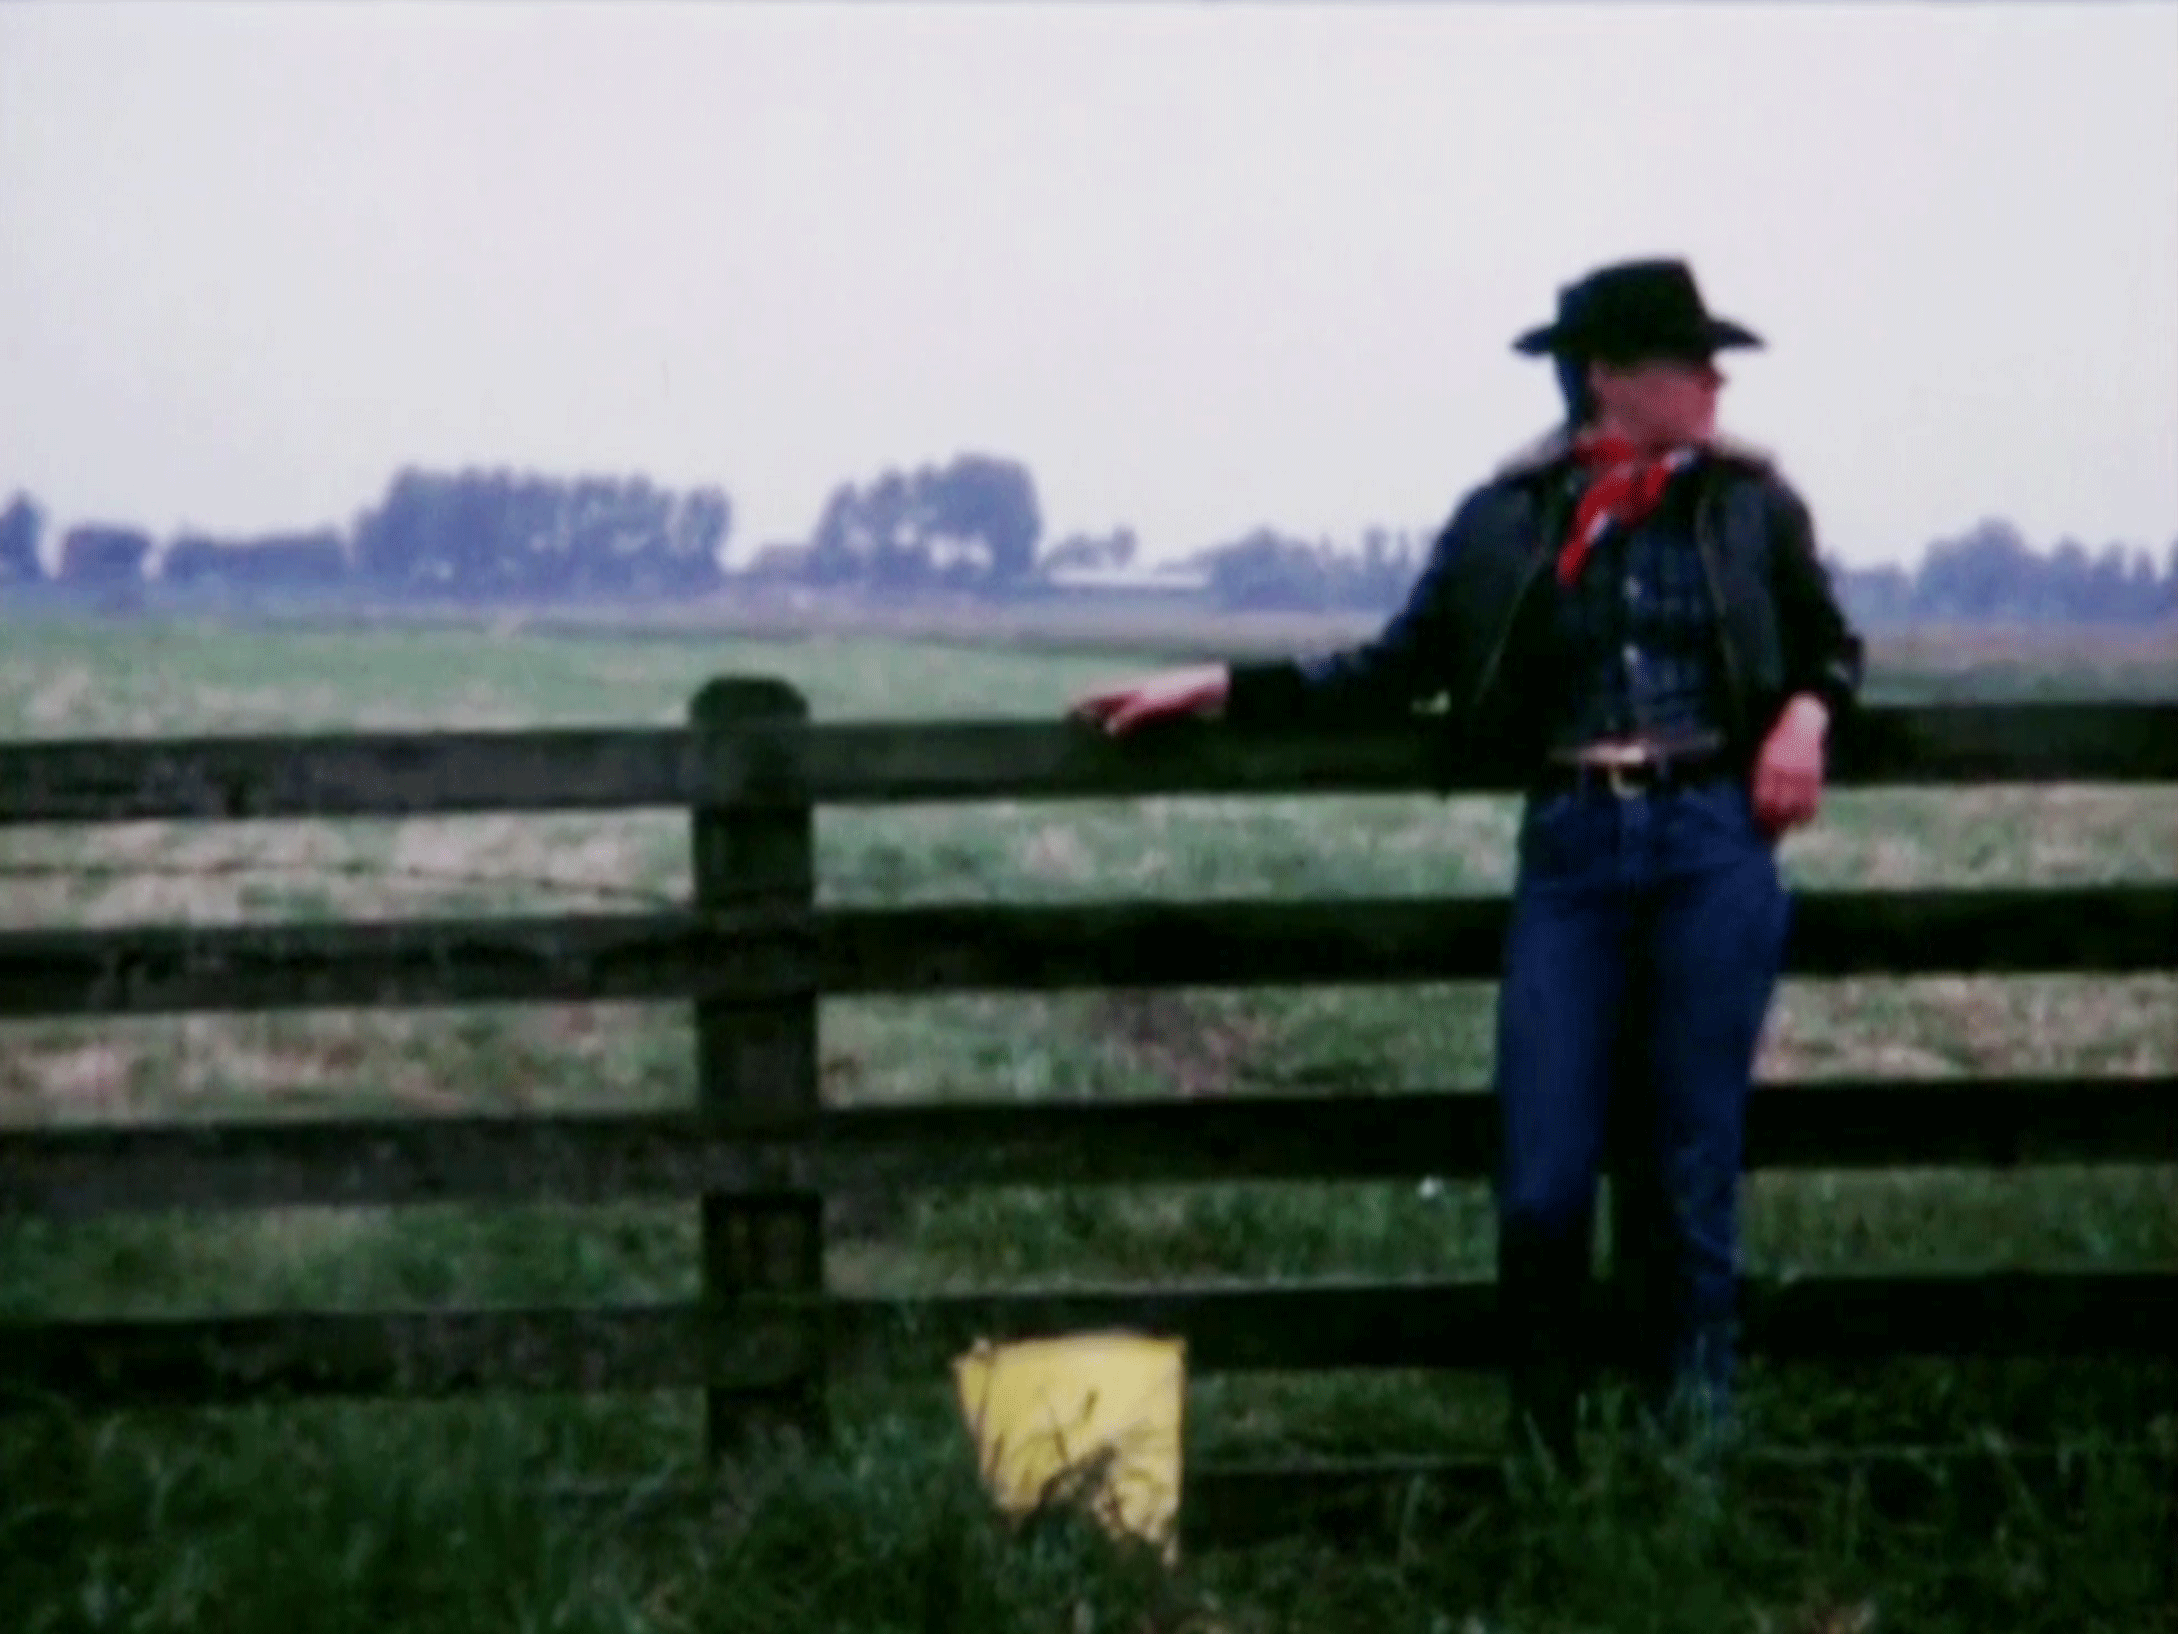 Marja Samsom, *Busy with Cows*, 1974. Super-8 movie, digitized